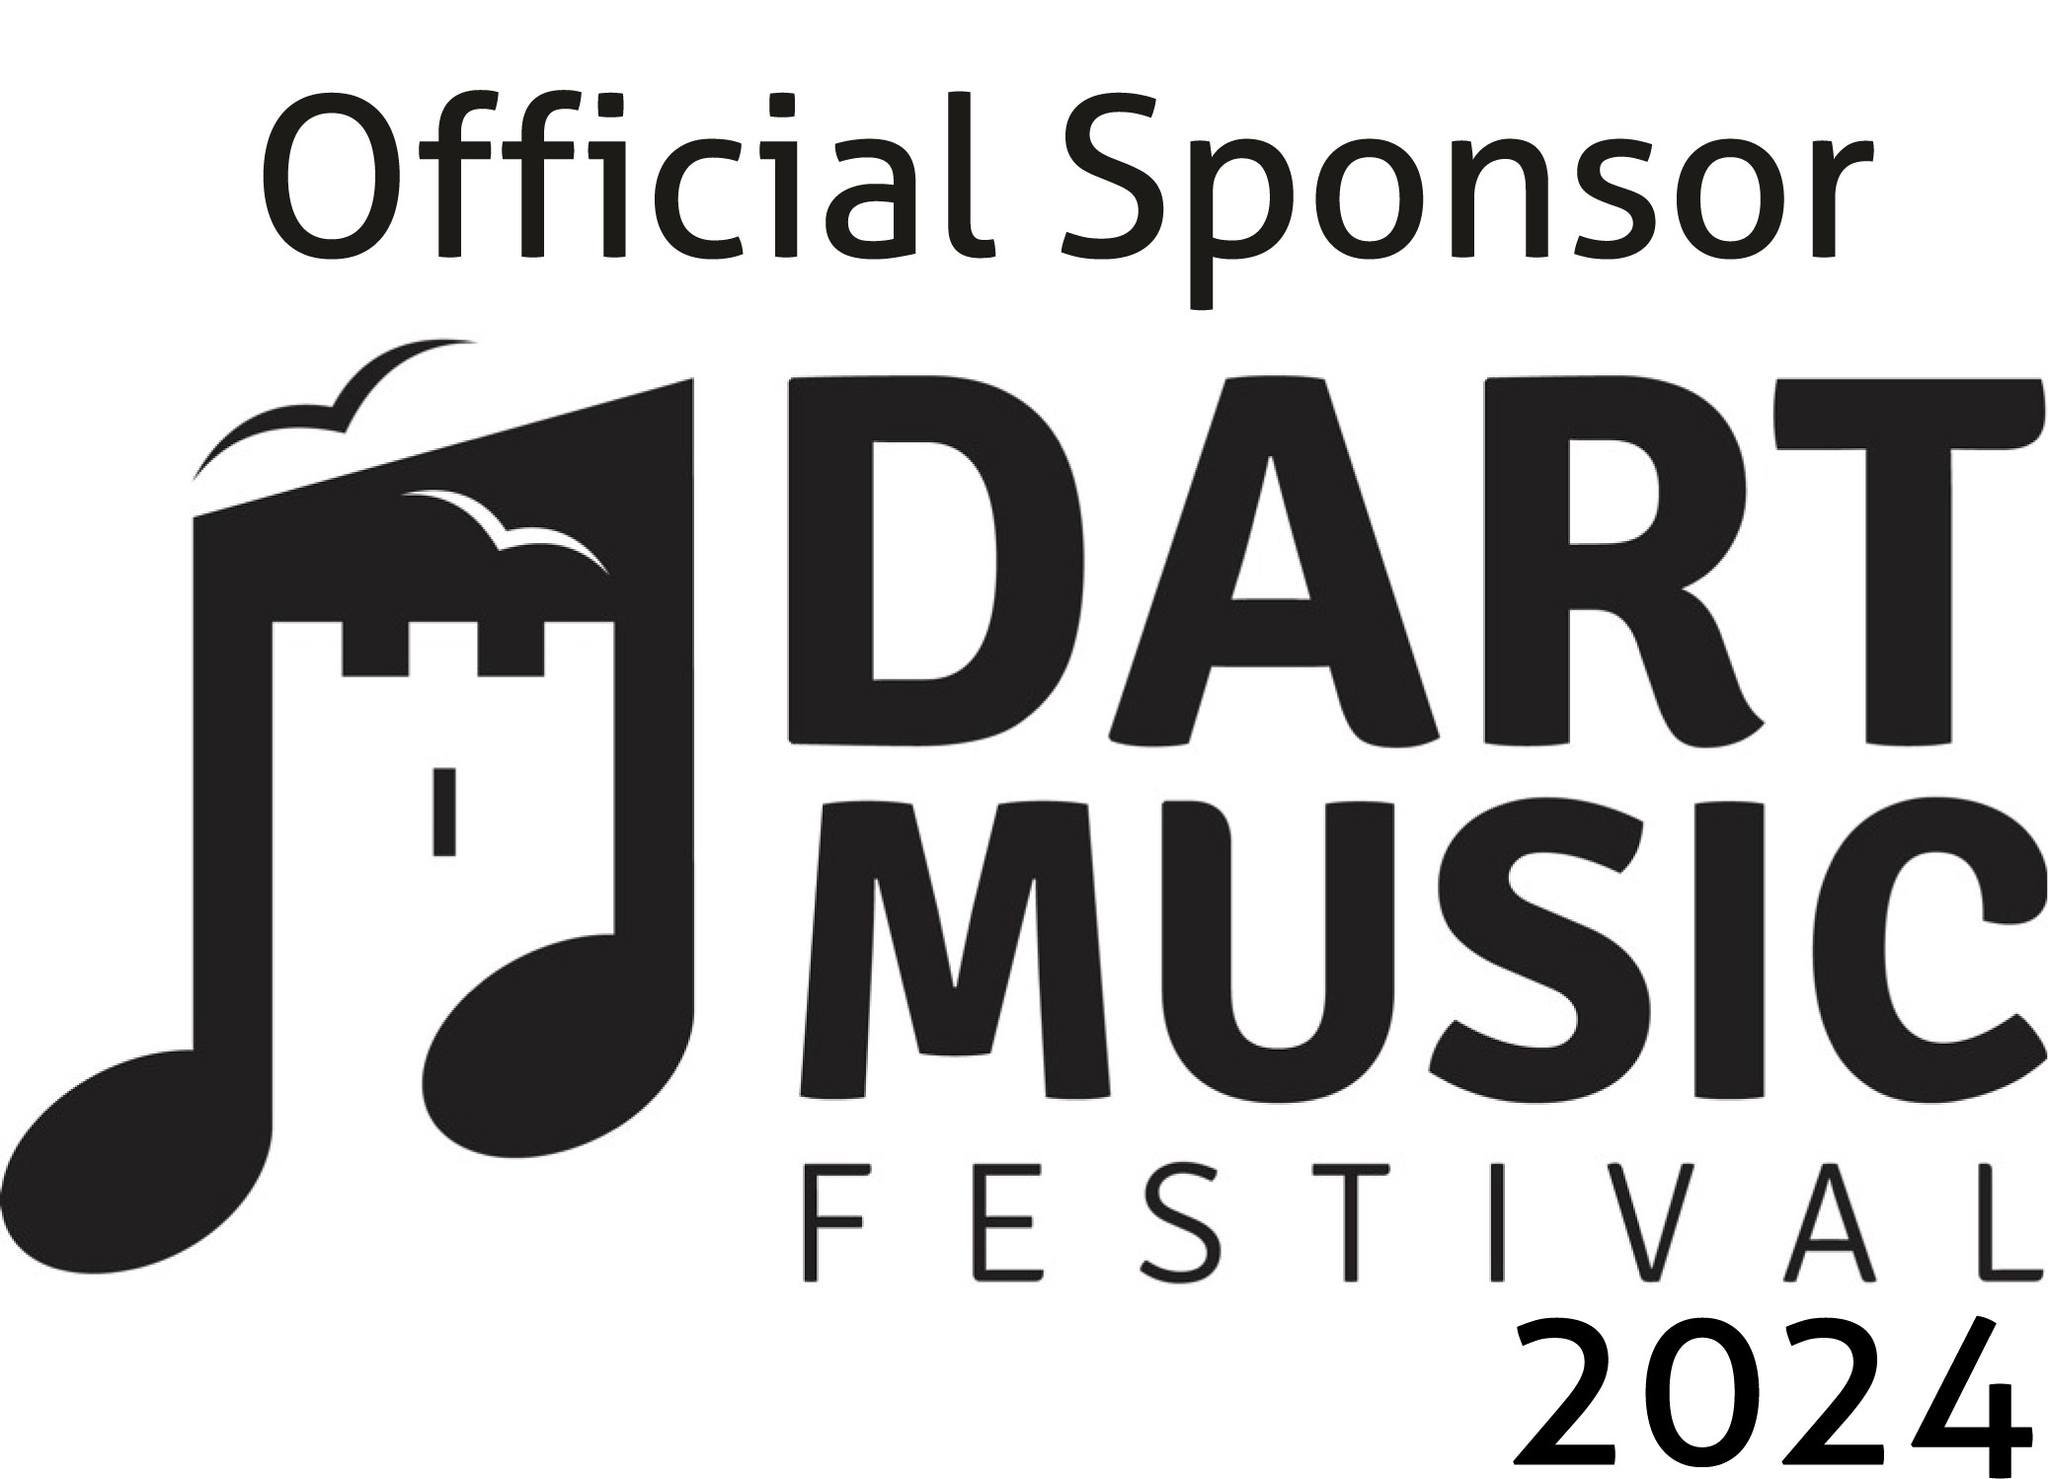 Not long to go until the Dart Music Festivall! RJA are proud to be Gold Sponsors of this amazing music event taking place in Dartmouth from 17th-19th May. The team of volunteers work tirelessly throughout the year raise the amount needed to ensure th